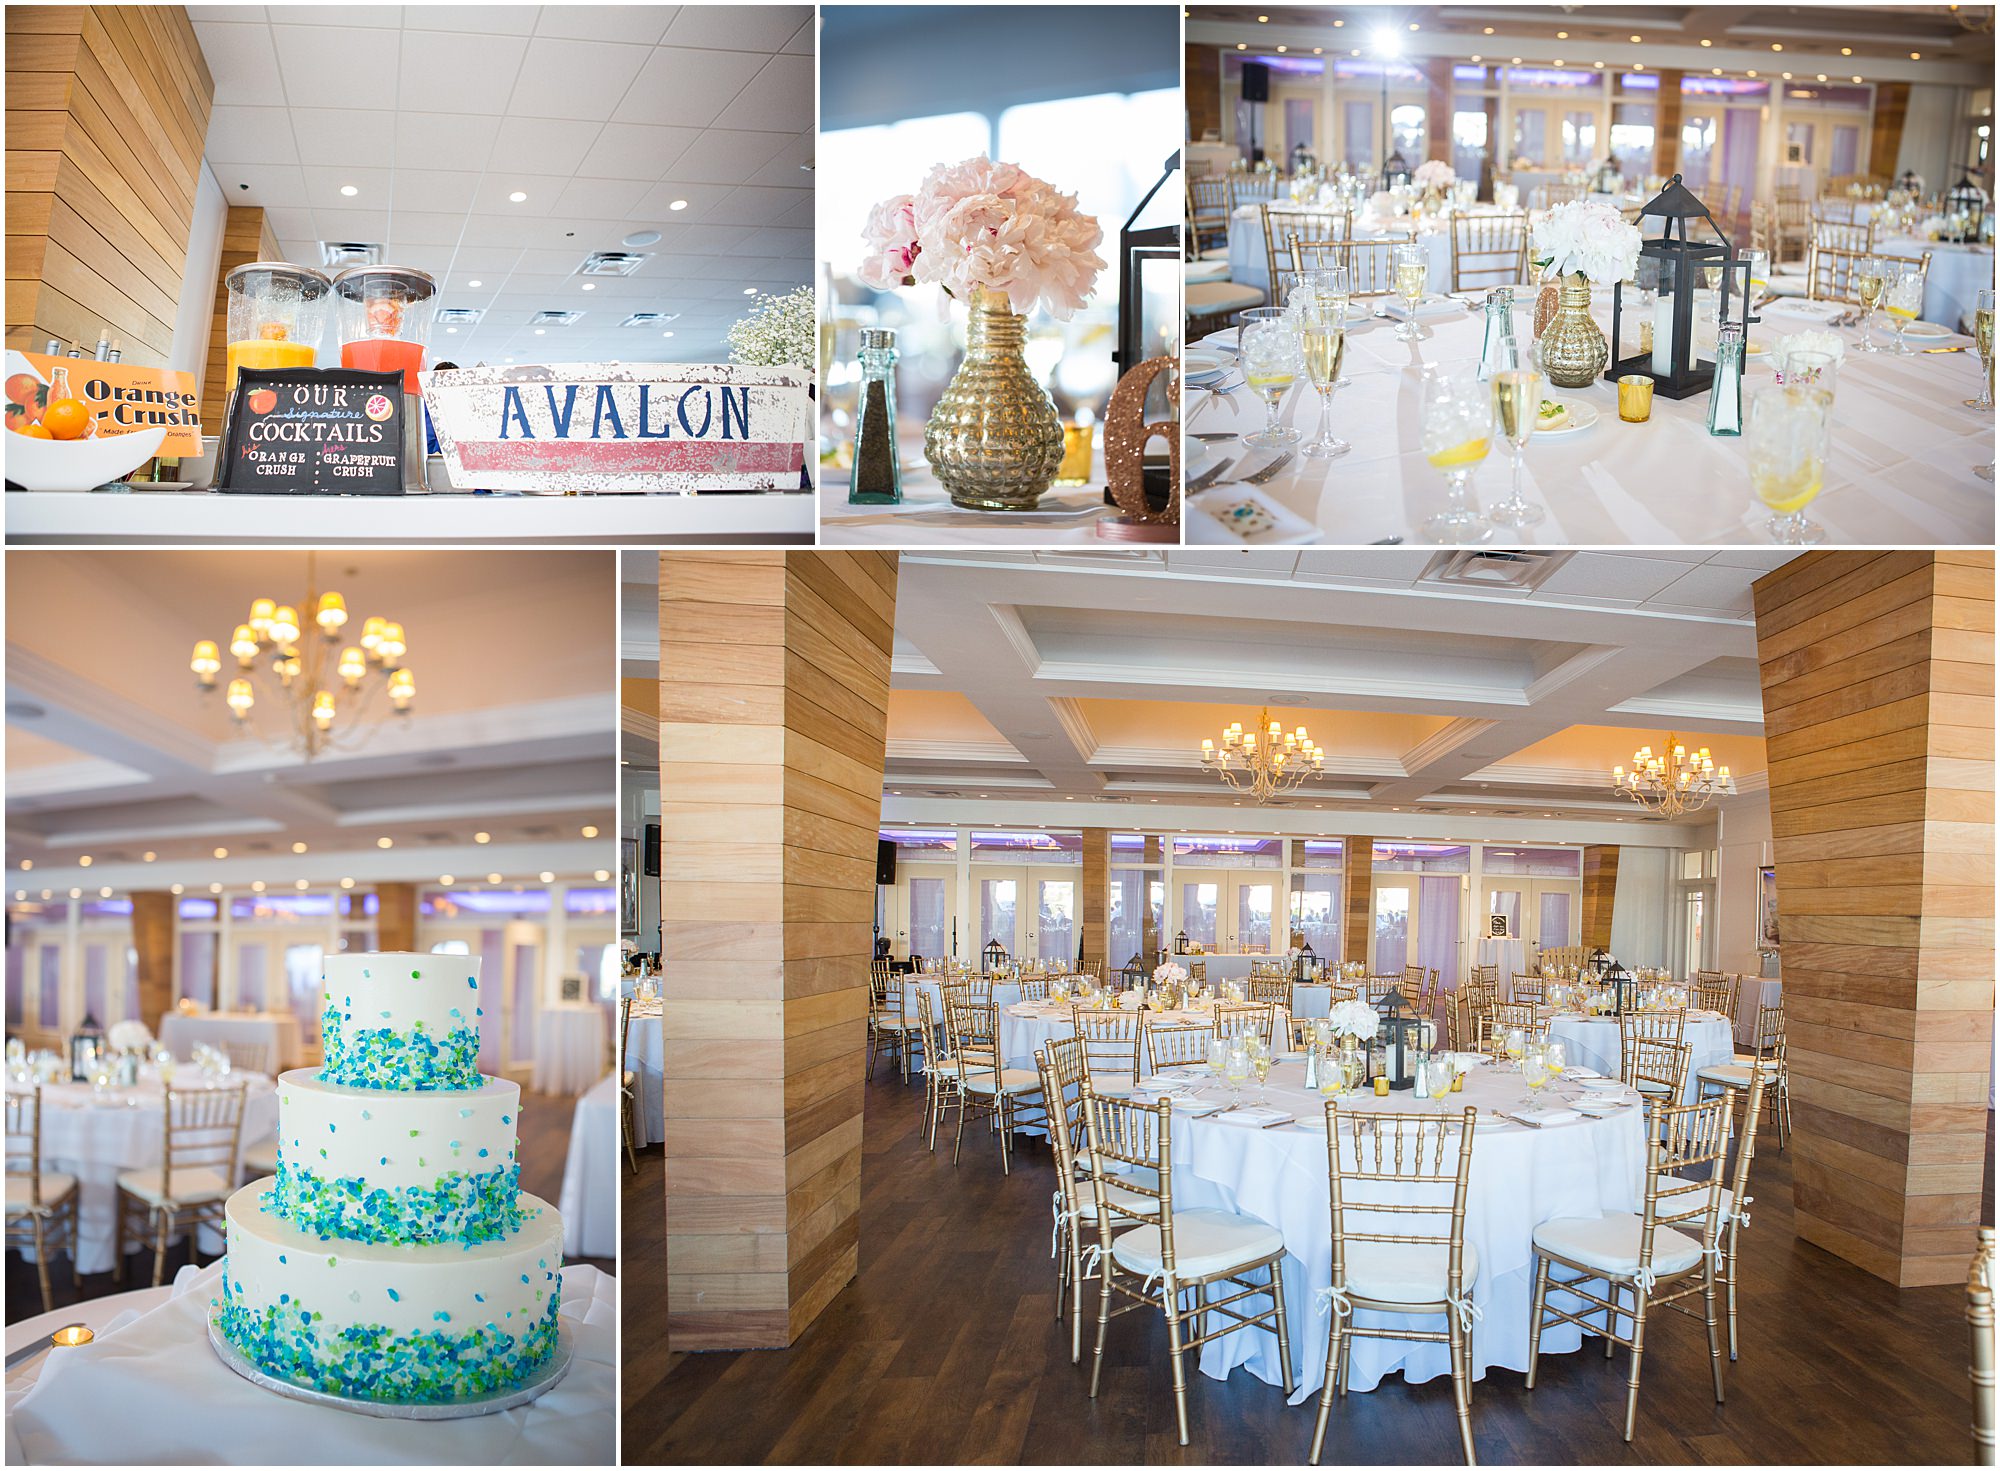 The all new Seaglass ballroom makes the ICONA Avalon one of the best Jersey Shore wedding venues!